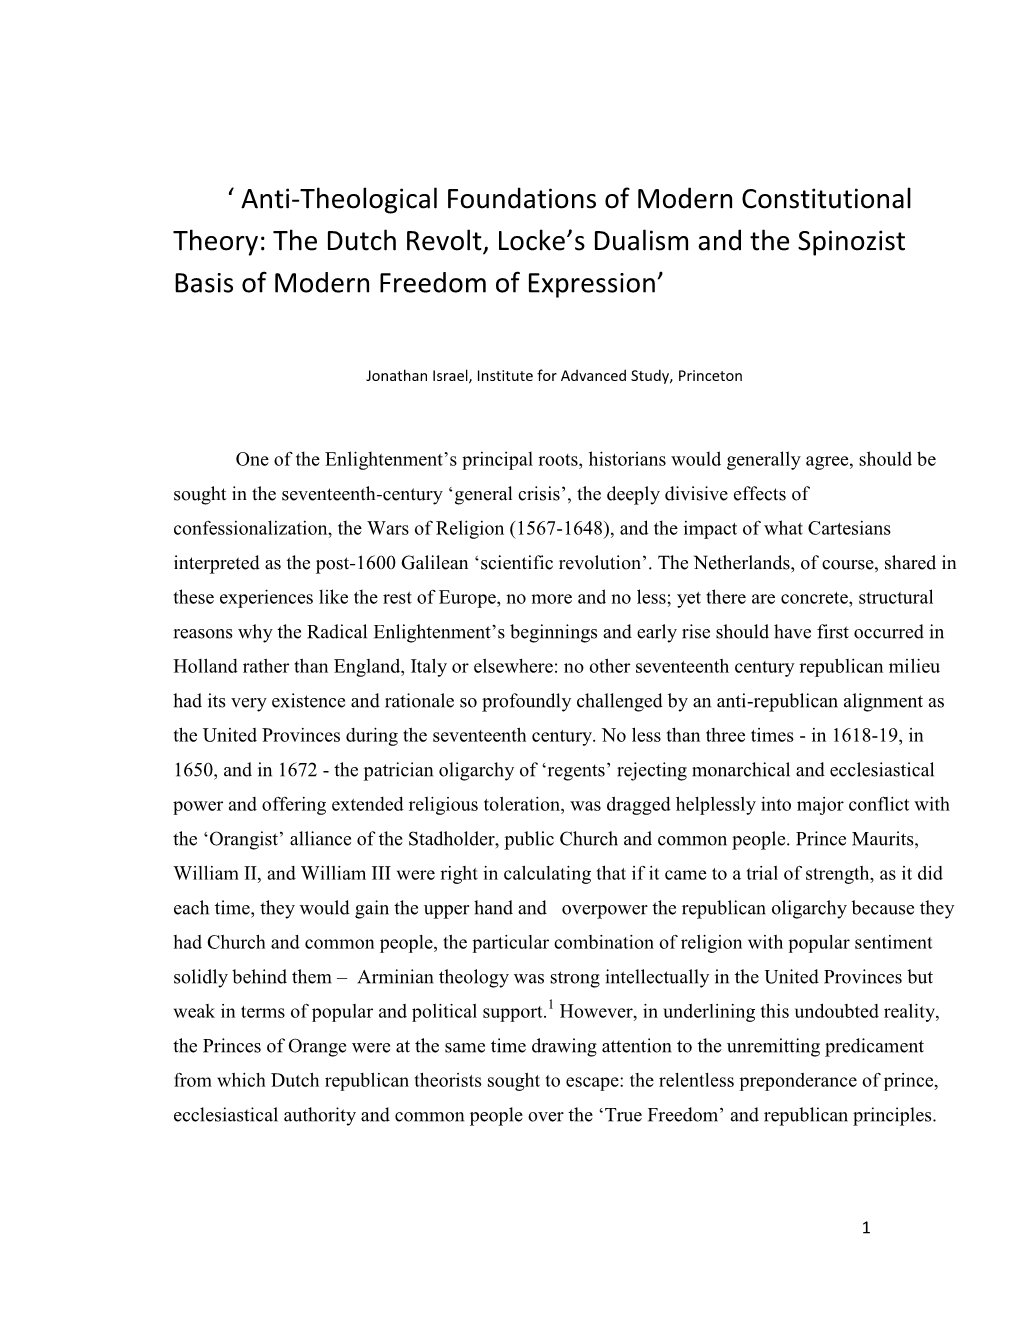 ' Anti-Theological Foundations of Modern Constitutional Theory: The